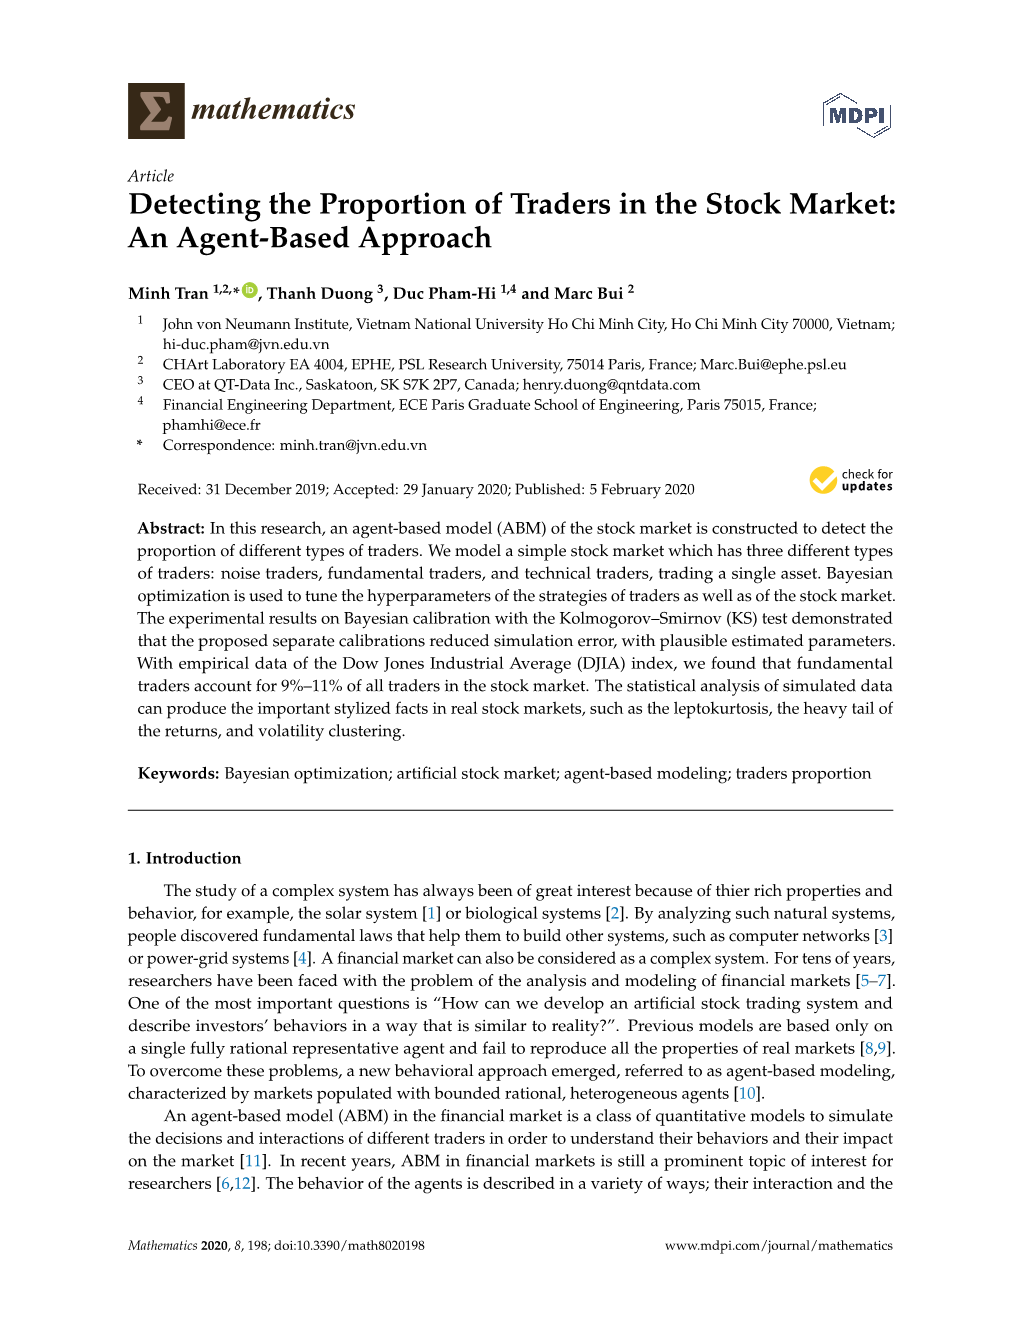 Detecting the Proportion of Traders in the Stock Market: an Agent-Based Approach